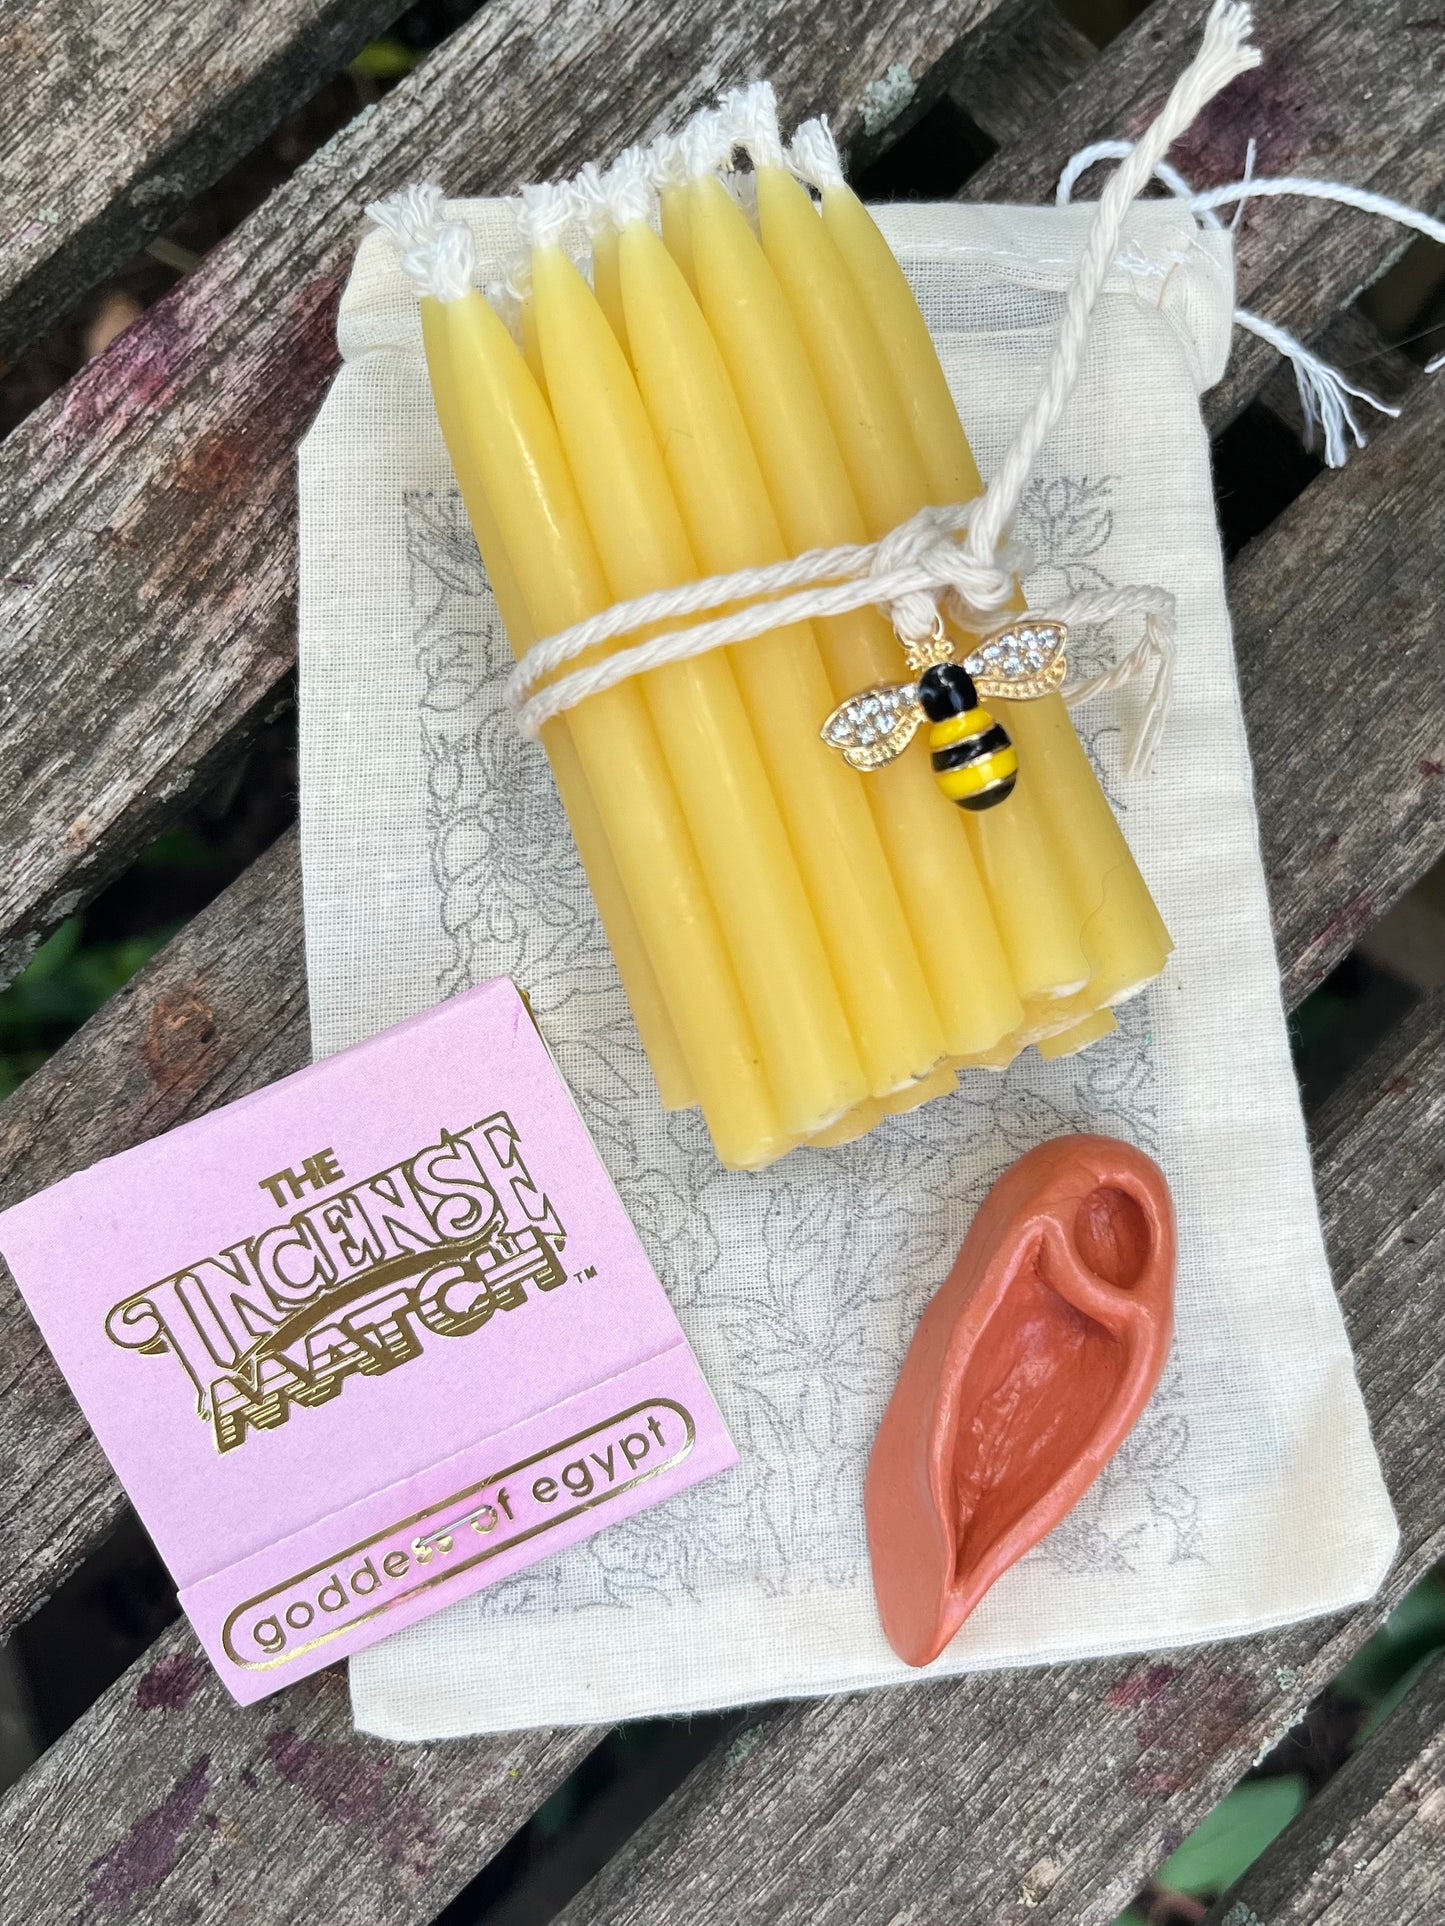 100% Pure Beeswax Candles- 30 Minute Meditation Candles-GODDESS-30 Candle Set as